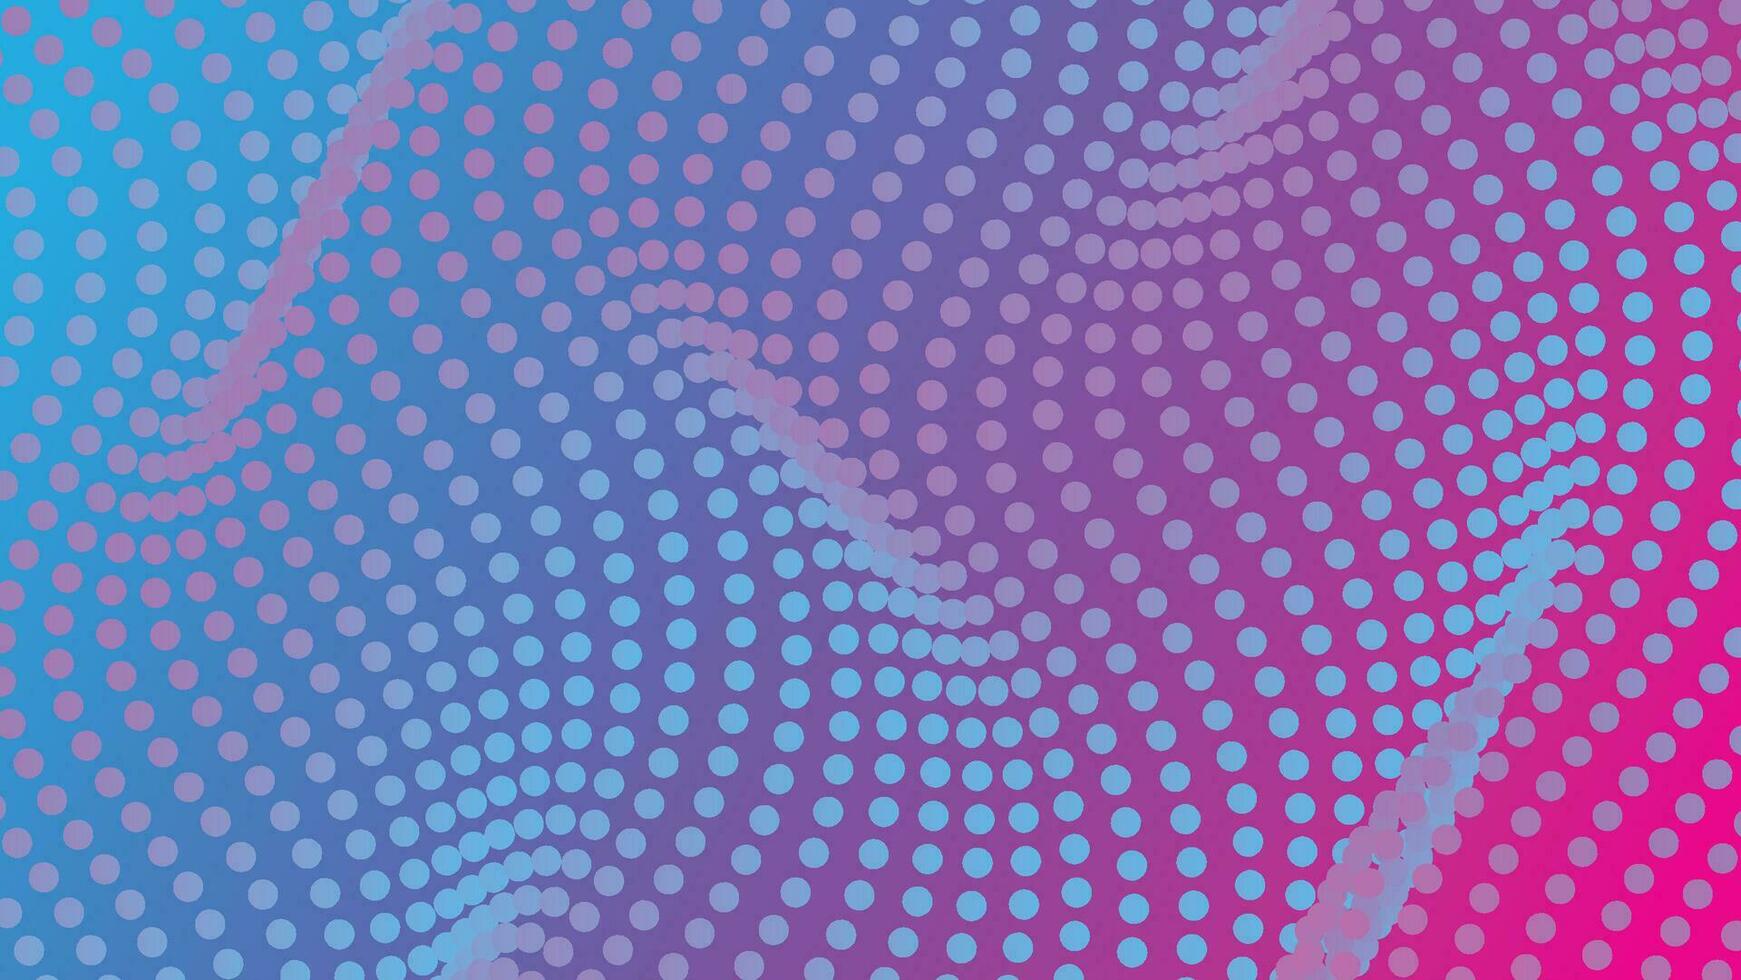 abstract background with dots wavy pattern on blue and pink gradient color vector